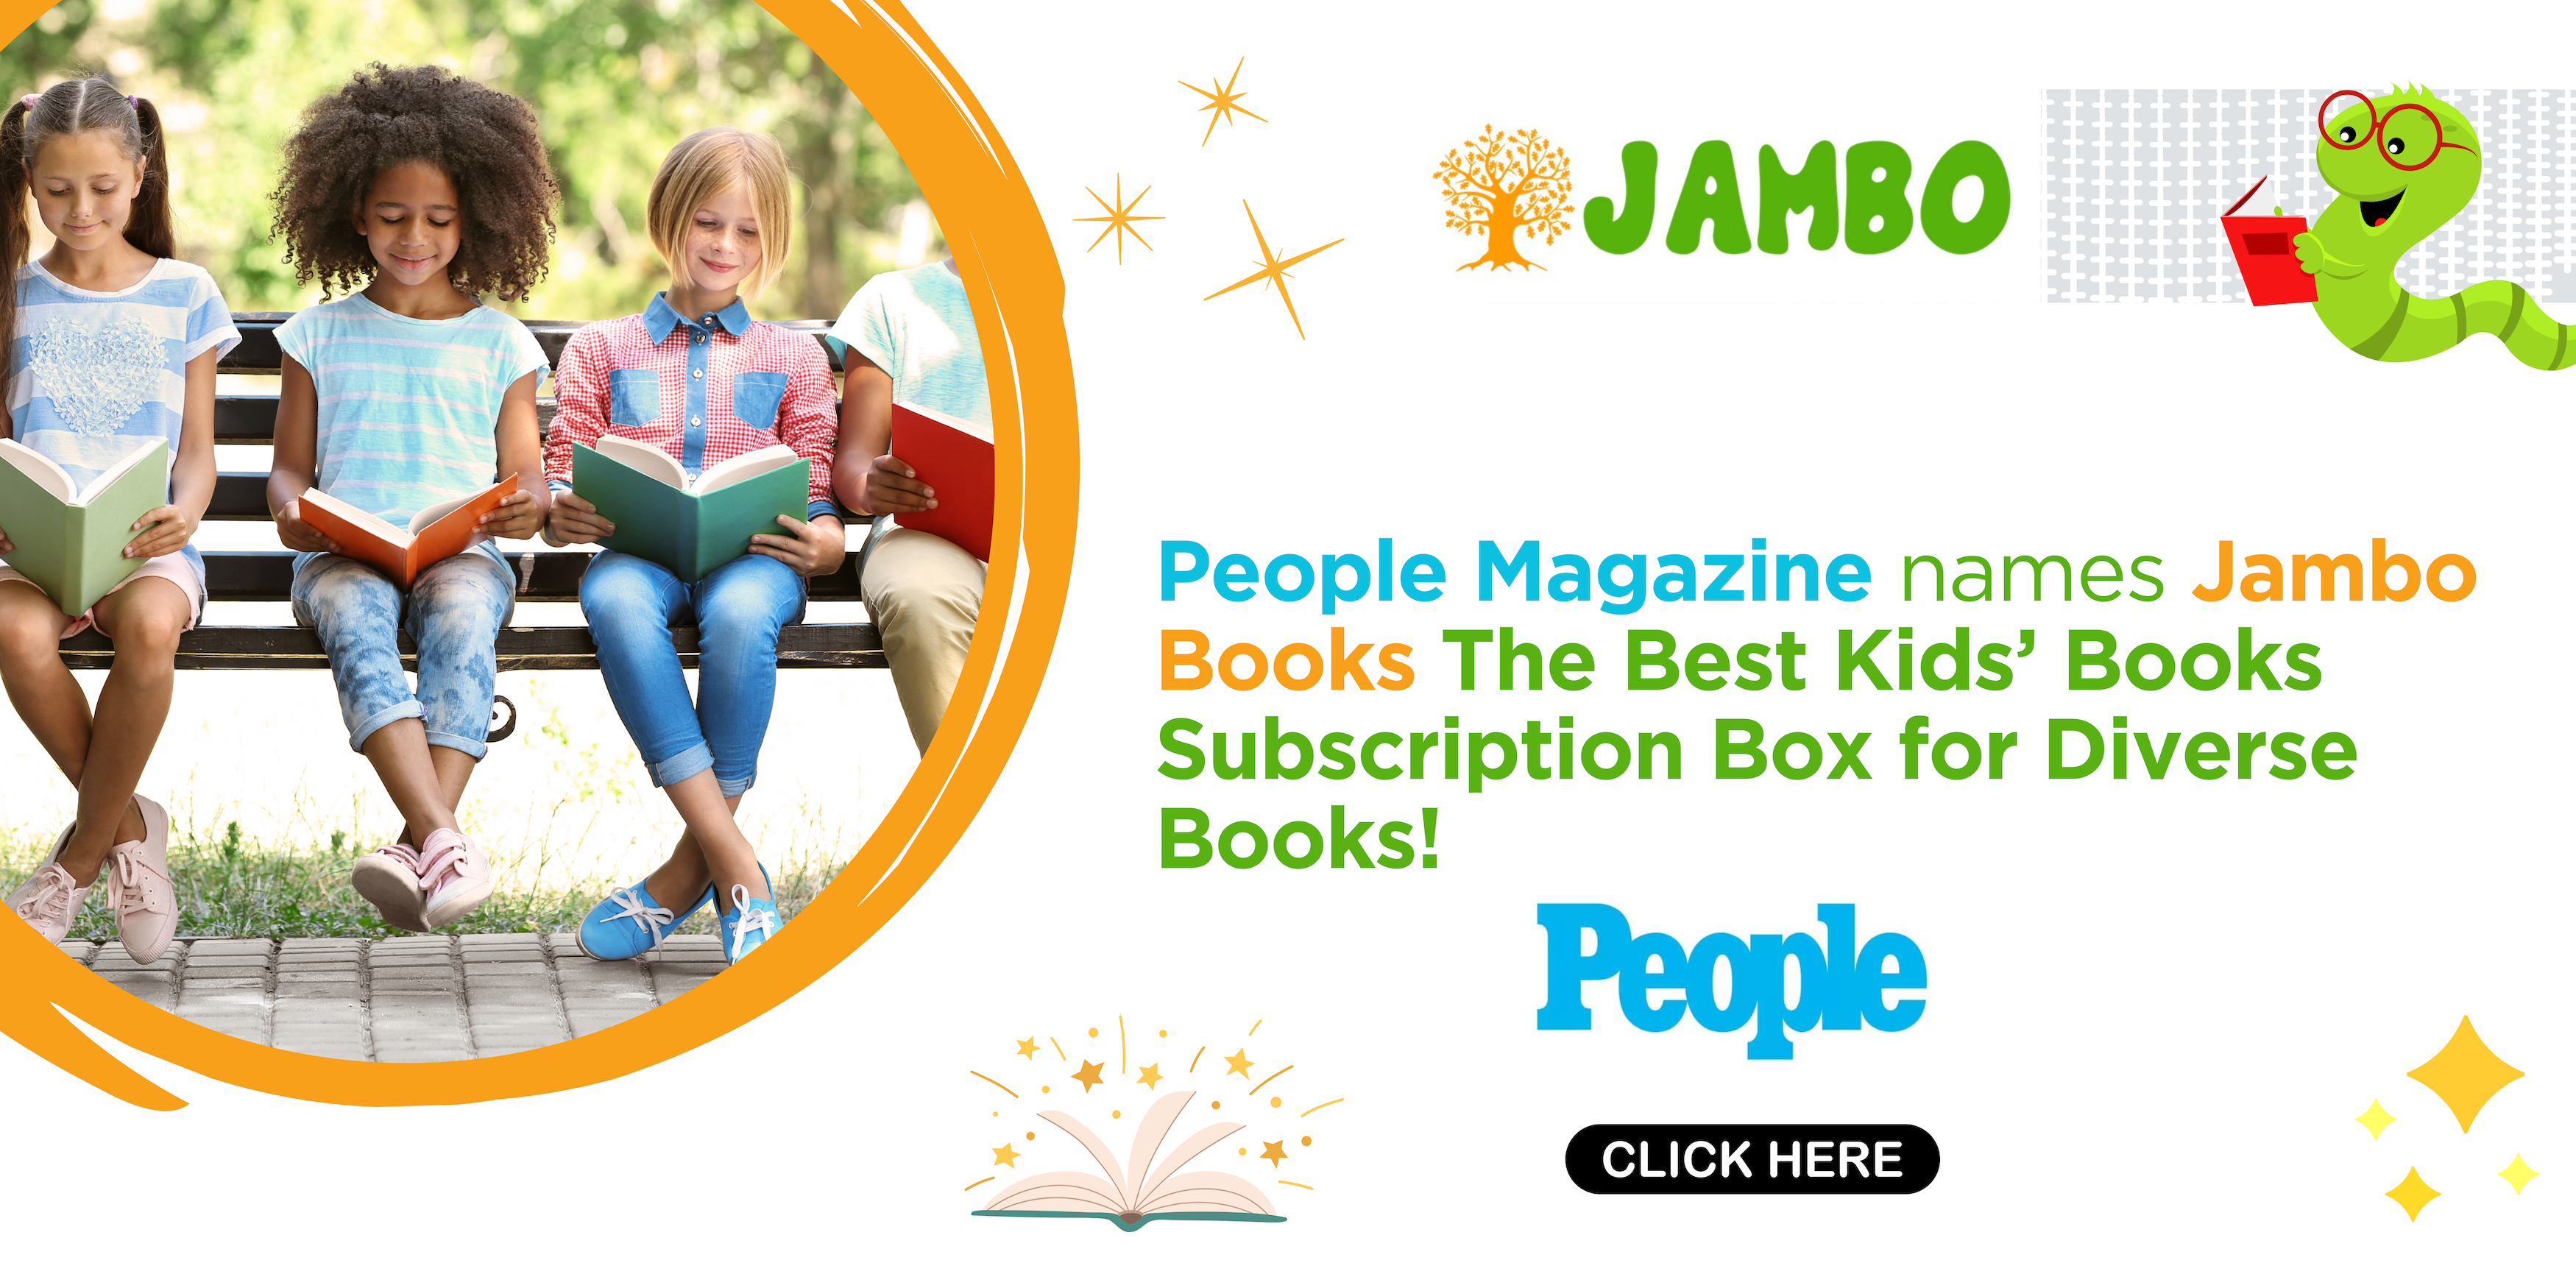 425-people-magazine-names-jambo-books-the-best-kids-books-subscription-box-for-dive-16986774017808.png